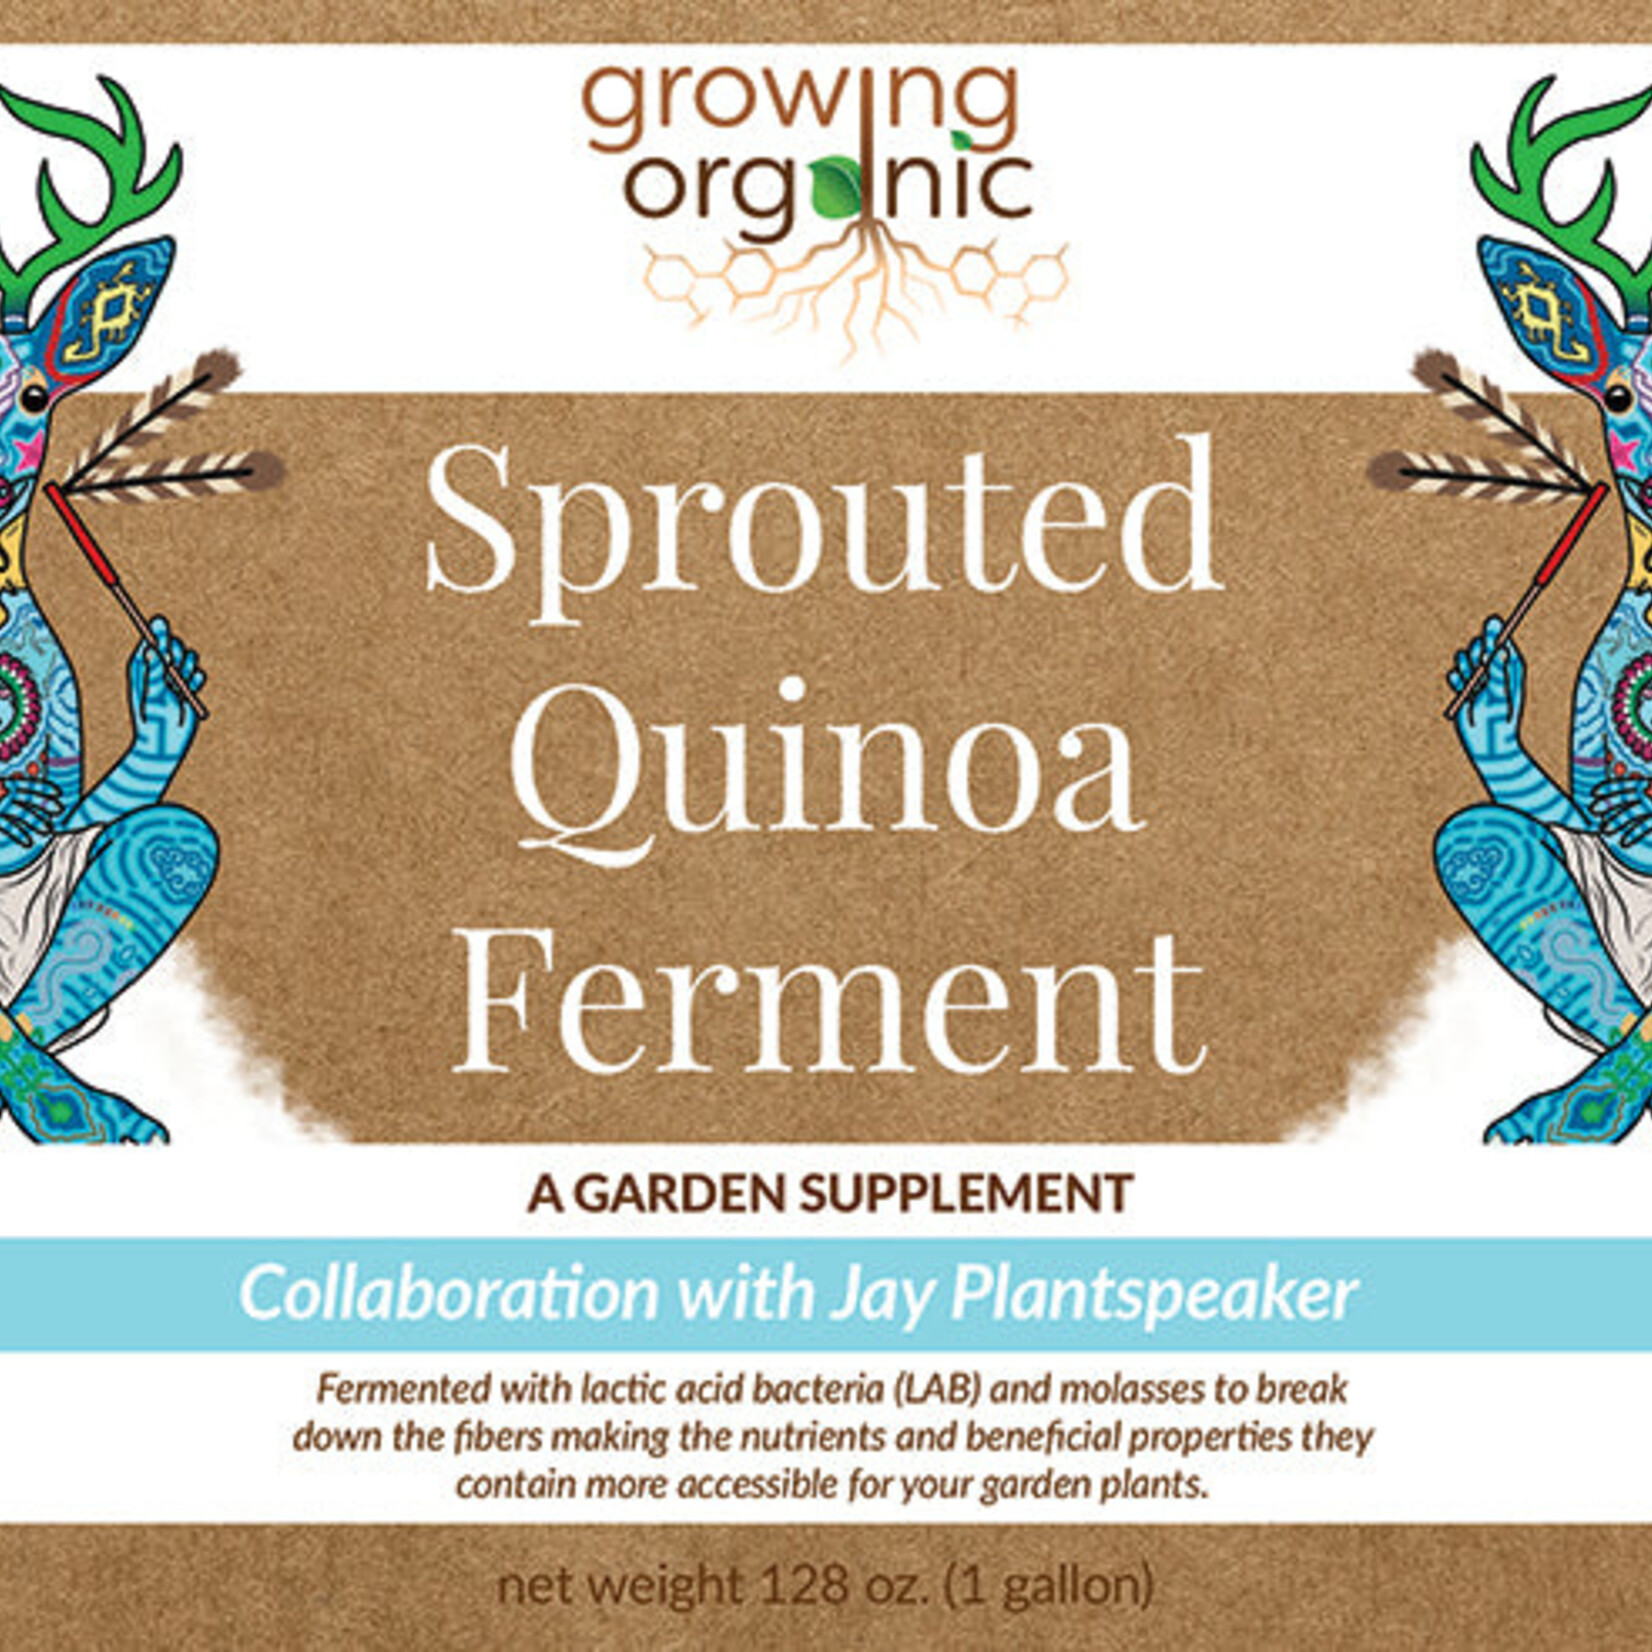 Growing Organic Growing Organic Sprouted Quinoa Ferment, 1 Gallon